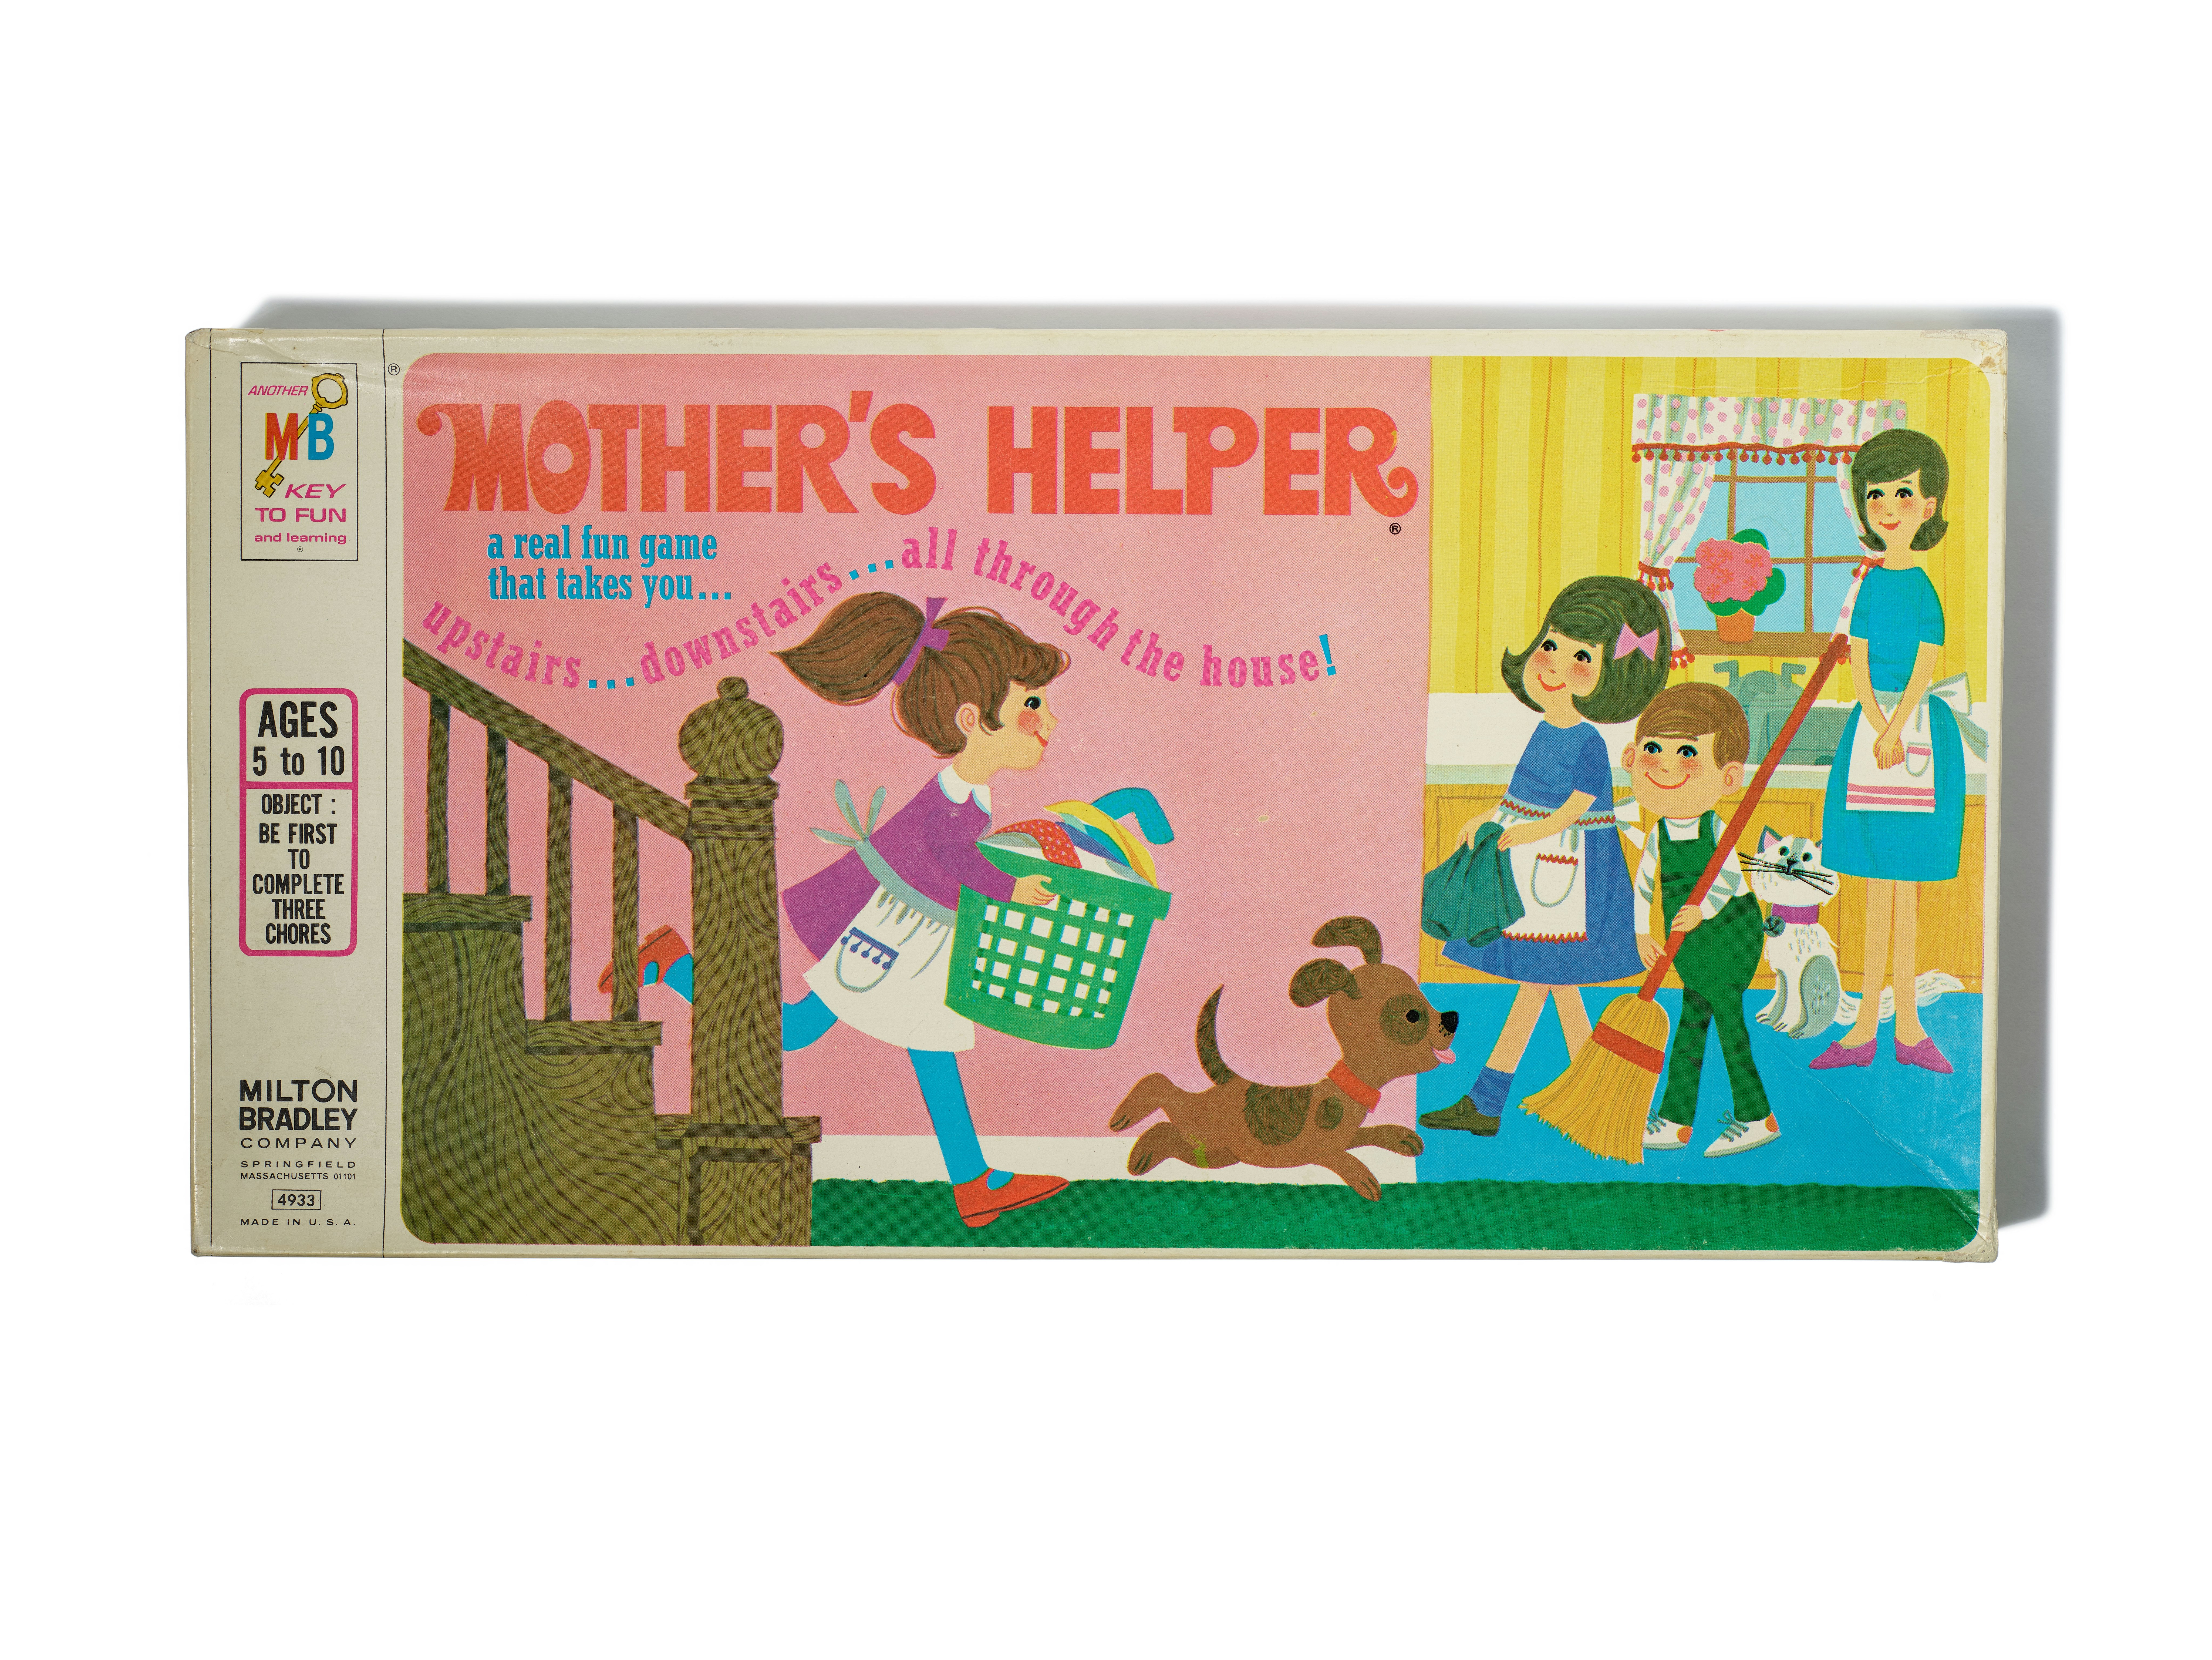 An old Milton Bradley board game called Mother's Helper, part of the "All Work, No Pay" exhibit at the National Museum of American History in DC